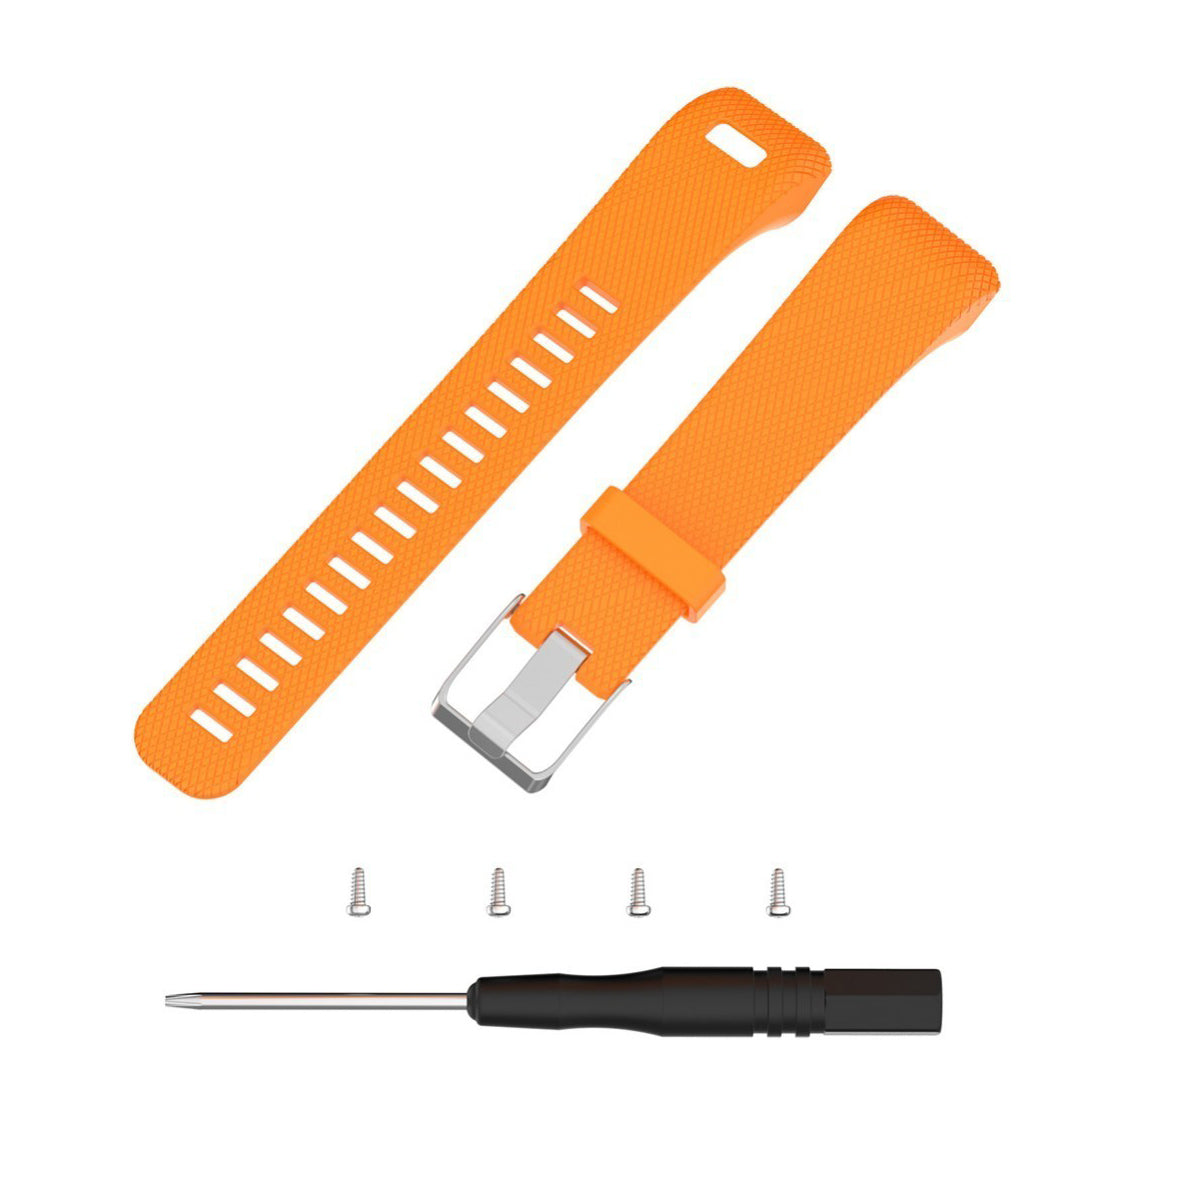 Garmin Approach X40 Replacement Bands Strap Kit with Tools Orange  